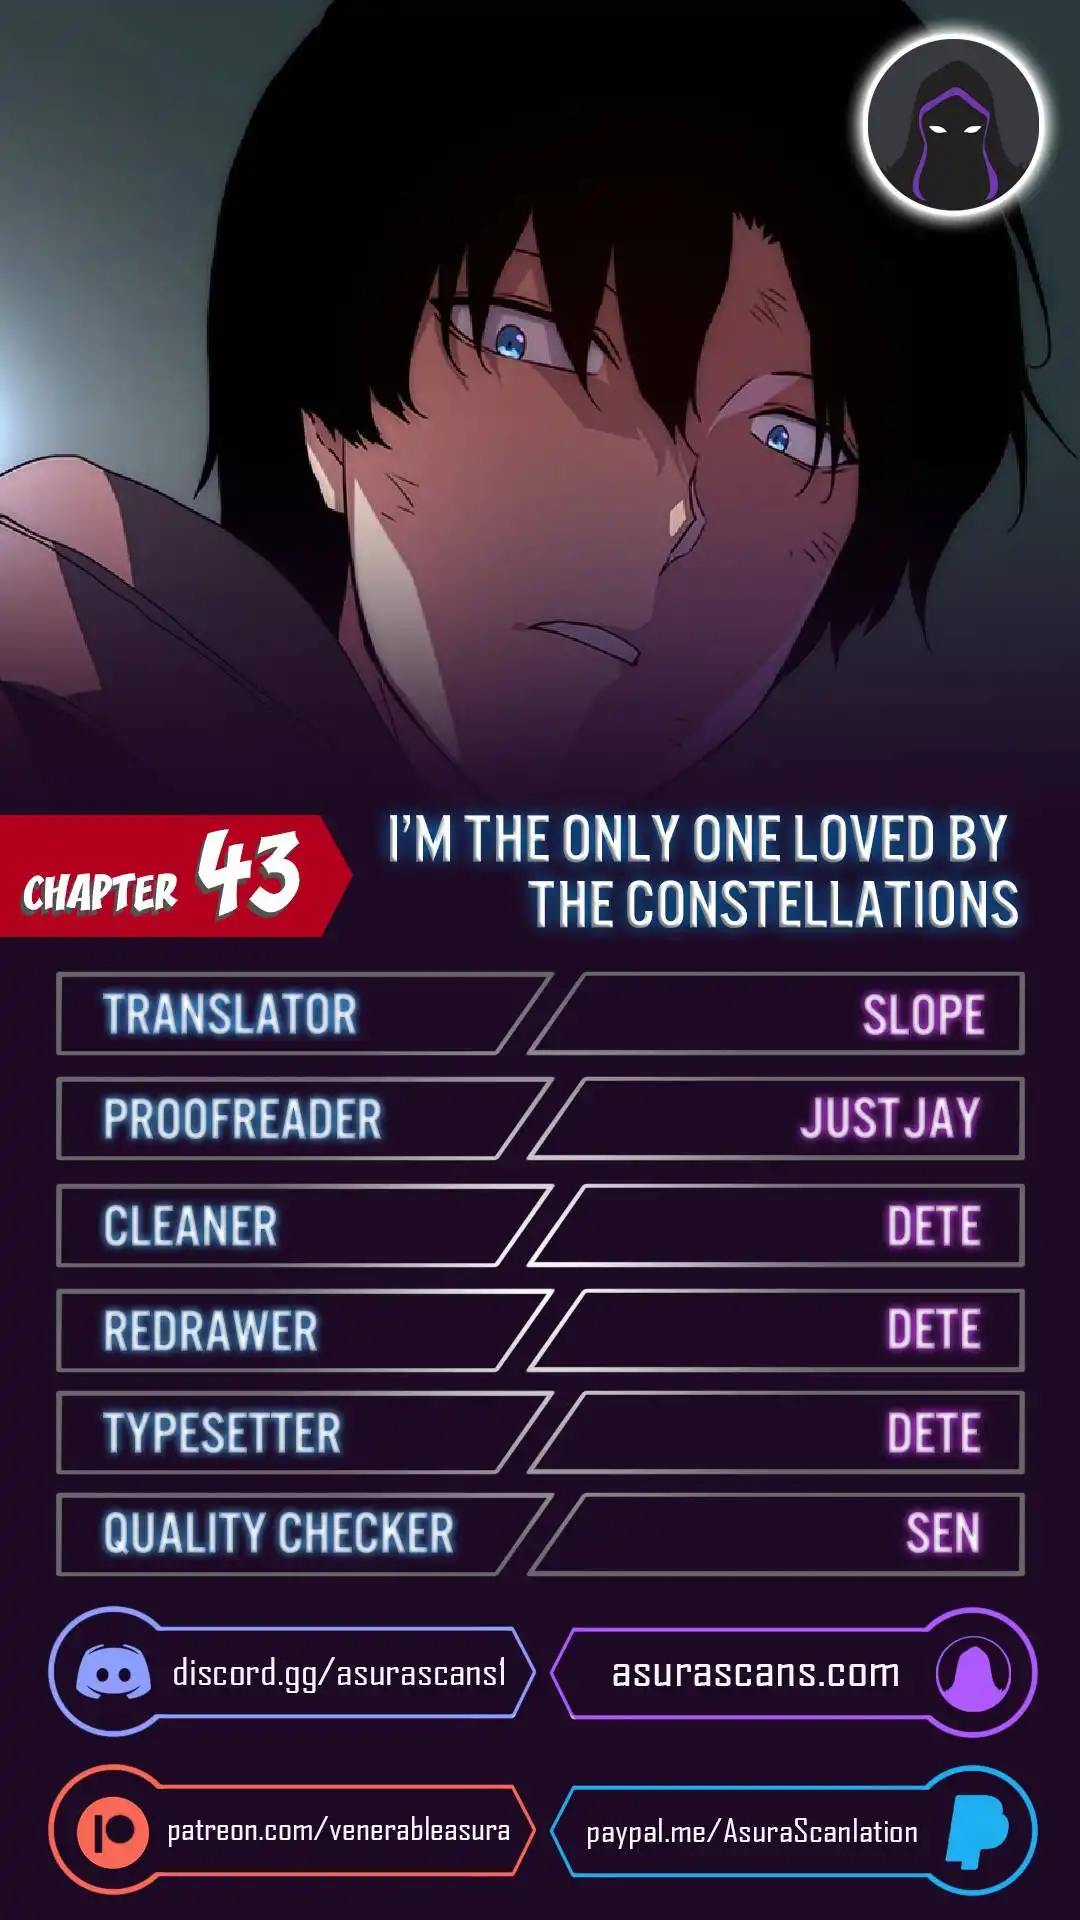 I'm the Only One Loved by the Constellations! Chapter 43